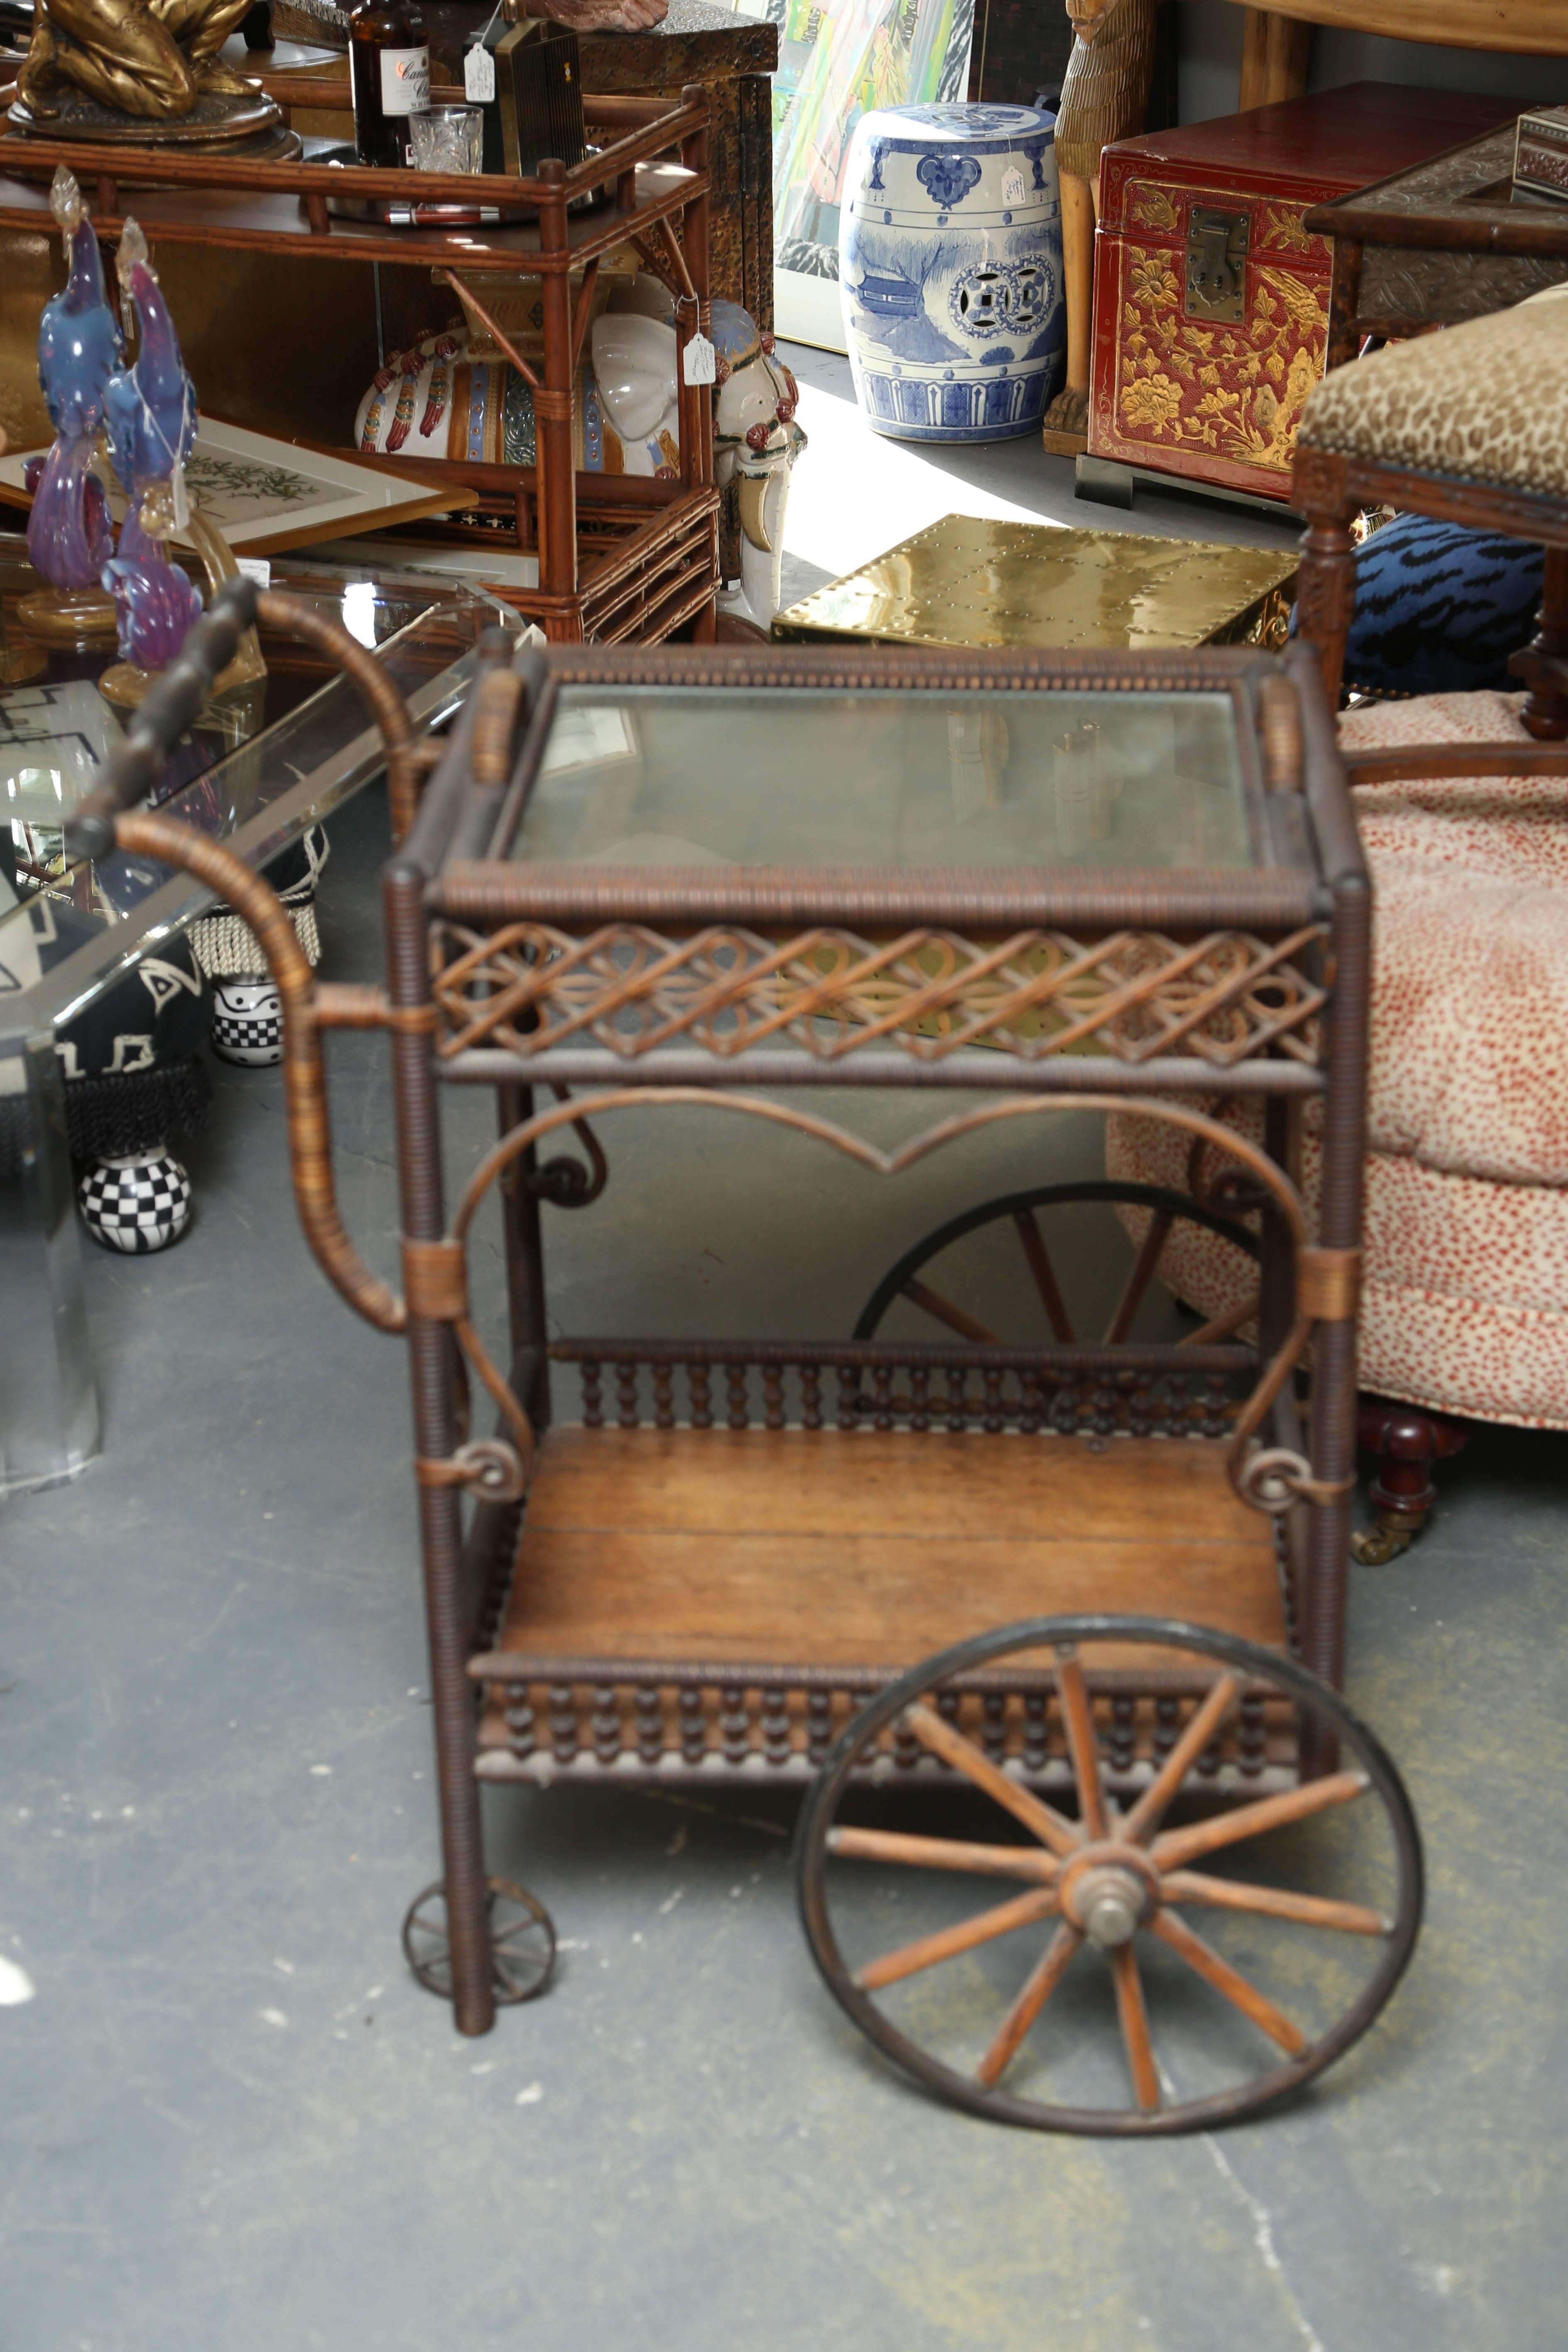 A remarkable cart- as if kept in a 